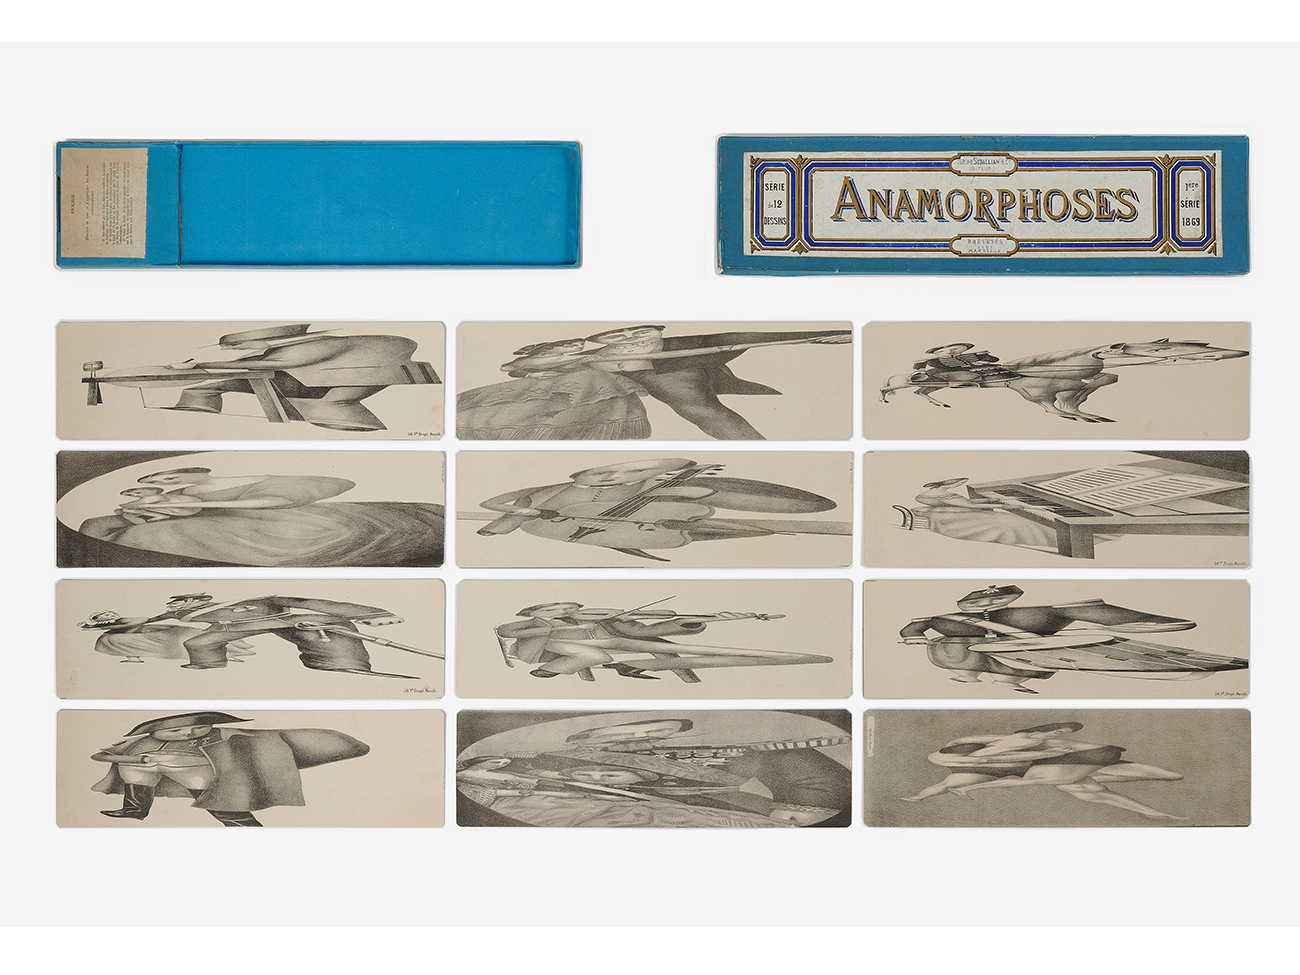 “Anamorphoses”, optical toy made up of 12 lithographs. Sedallian, 1869. Paper, card. Massilia Toy, Marseille © Yves Inchierman